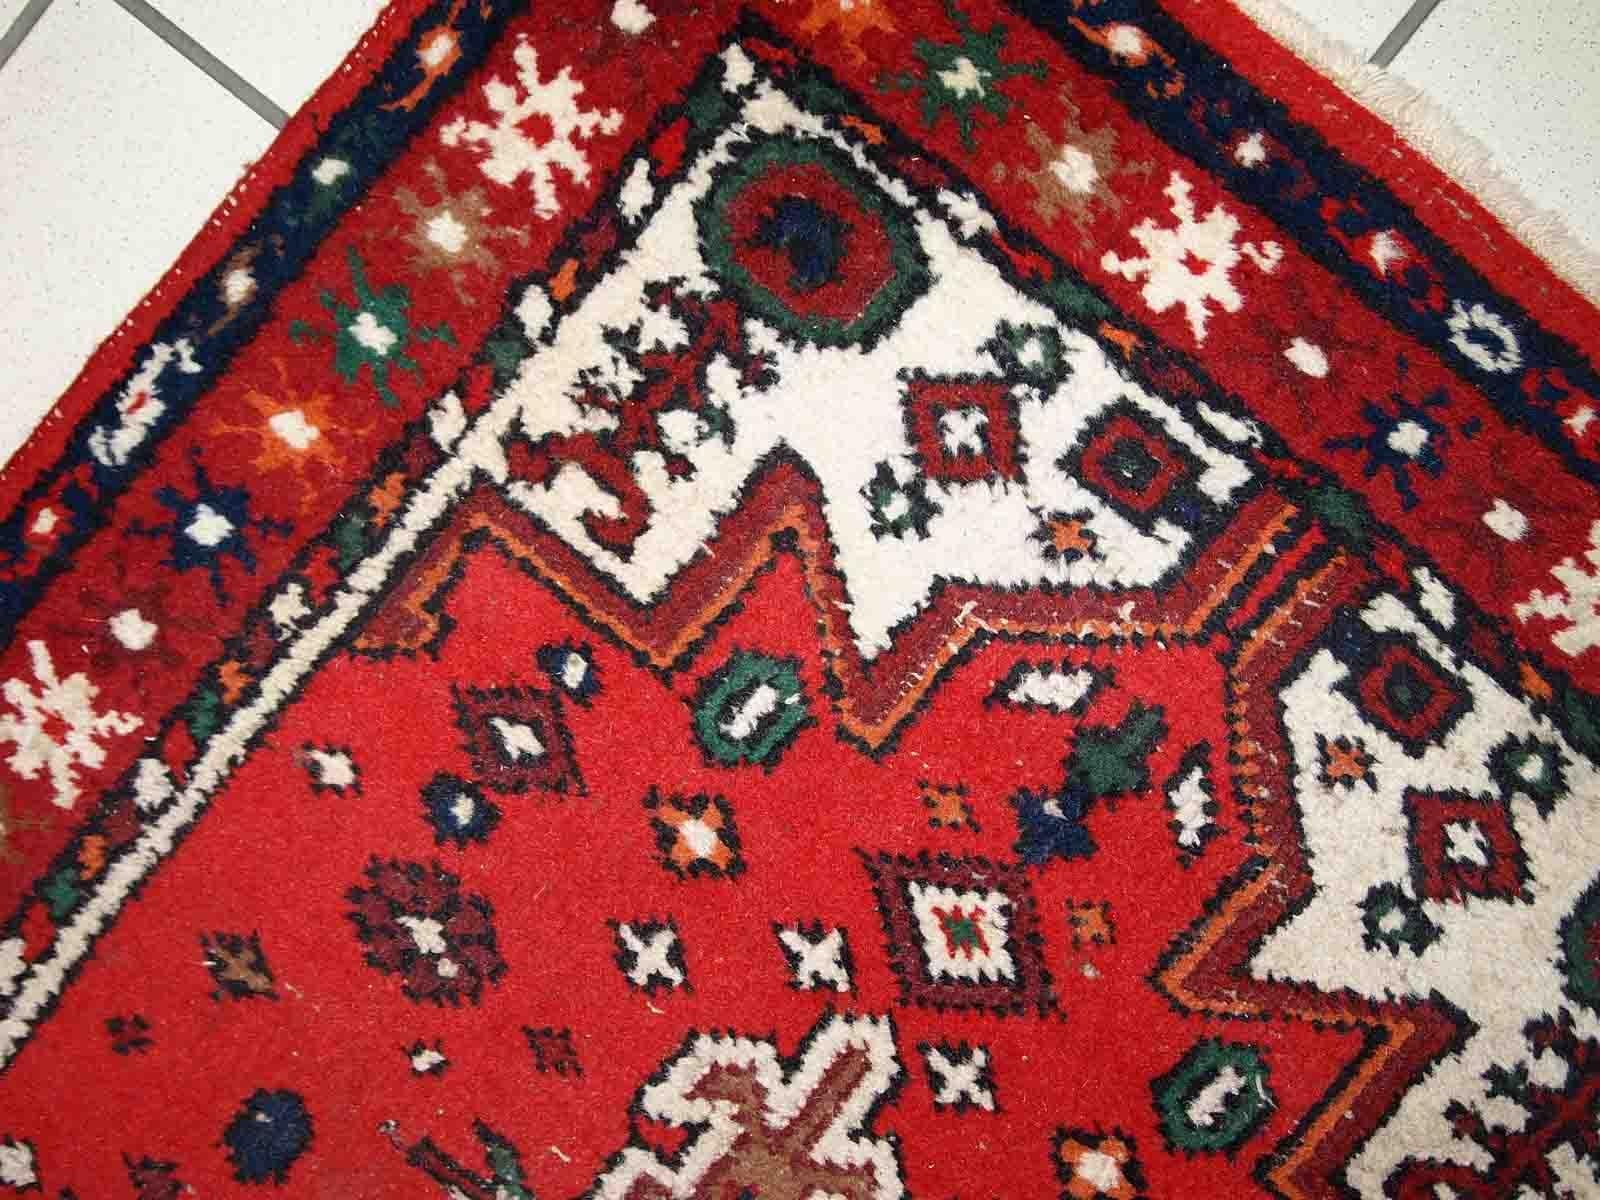 Handmade vintage Middle Eastern rug in traditional design. The rug is from the end of 20th century in original good condition. 

-condition: original good,

-circa: 1970s,

-size: 2.4' x 4.4' (75cm x 136cm),
?
-material: wool,

-country of